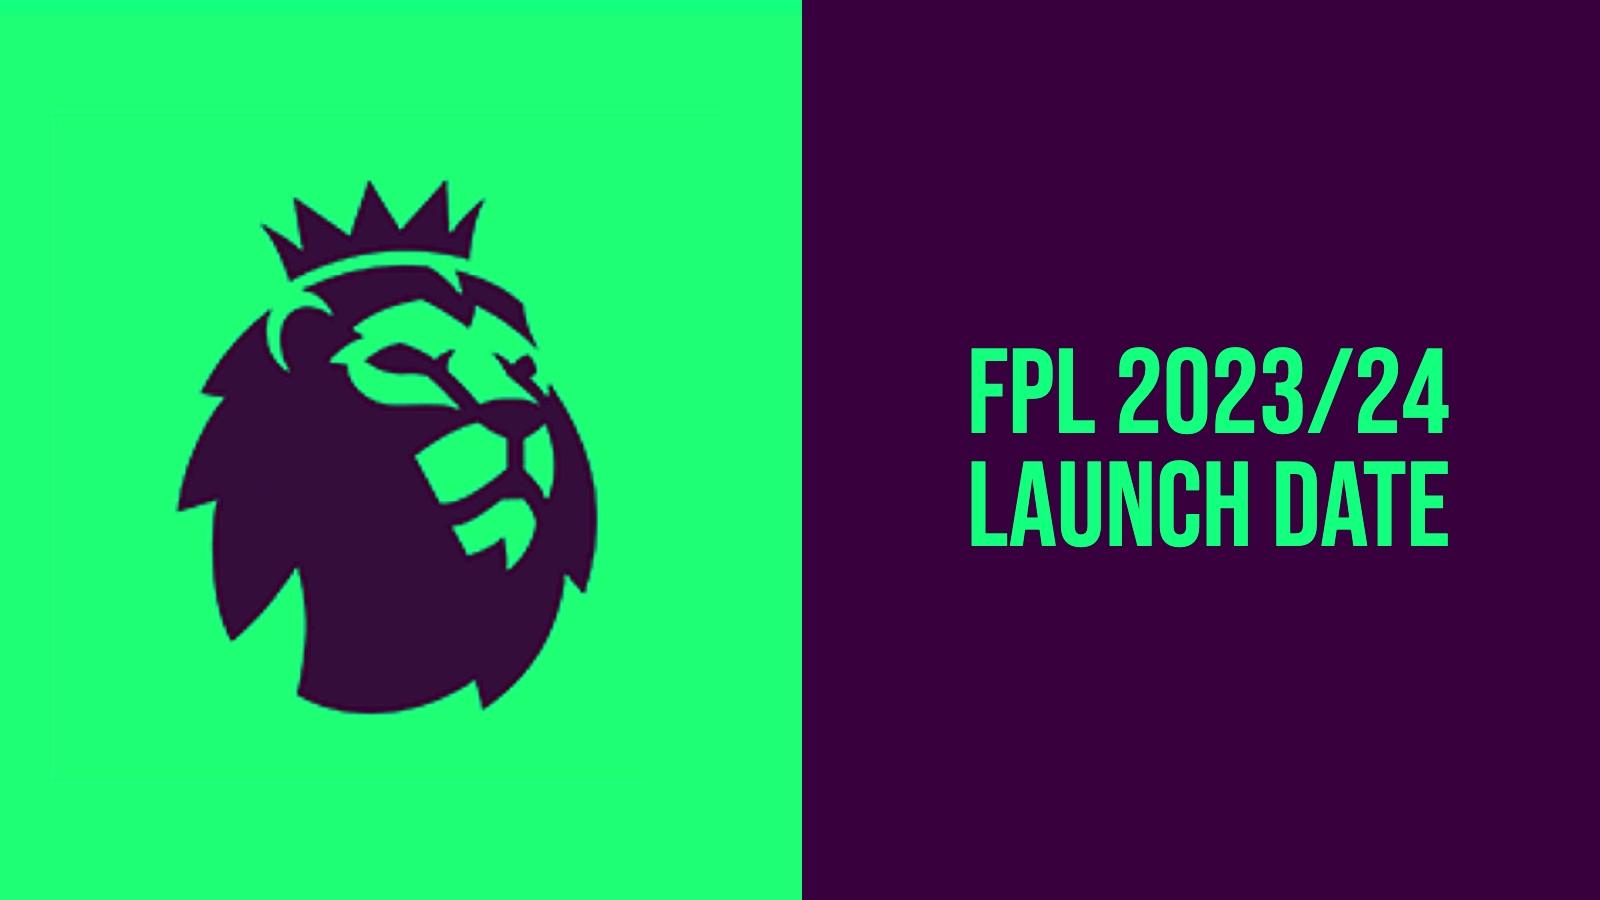 Fantasy Premier League logo on the left with FPL 2023/24 launch date on the right